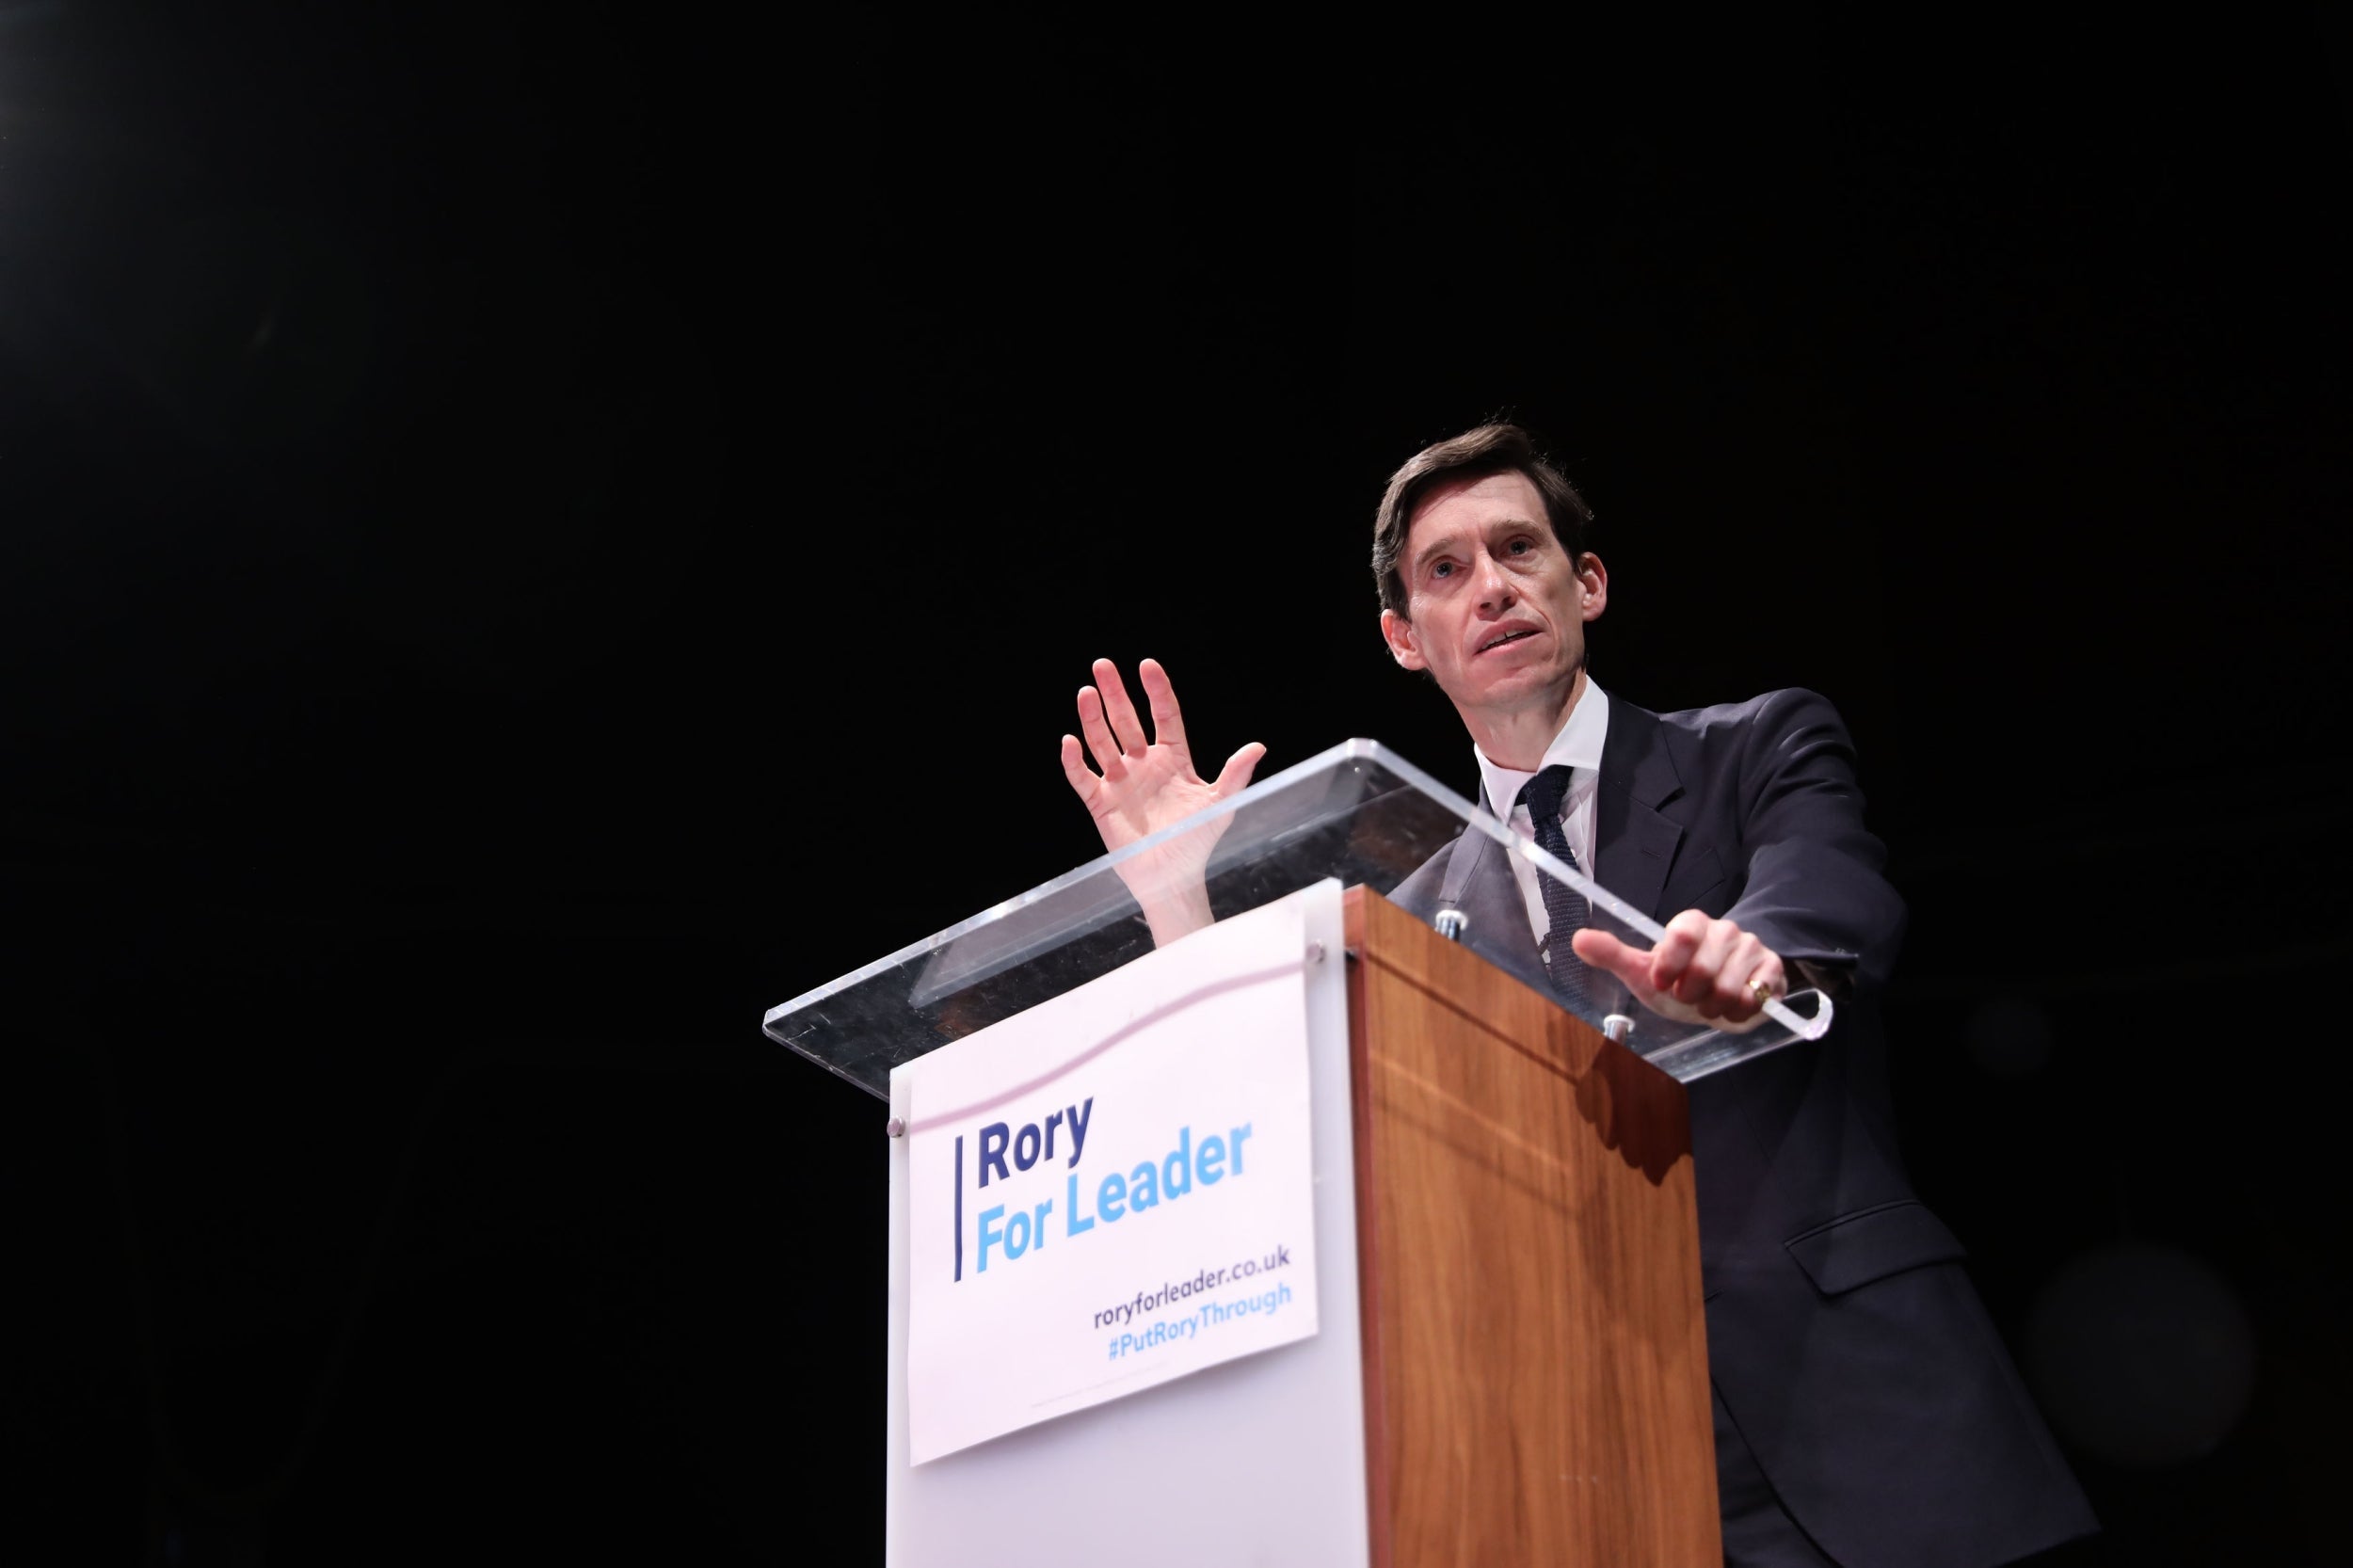 Rory Stewart can't help but tell the truth – that's why he has no chance in the Tory leadership race